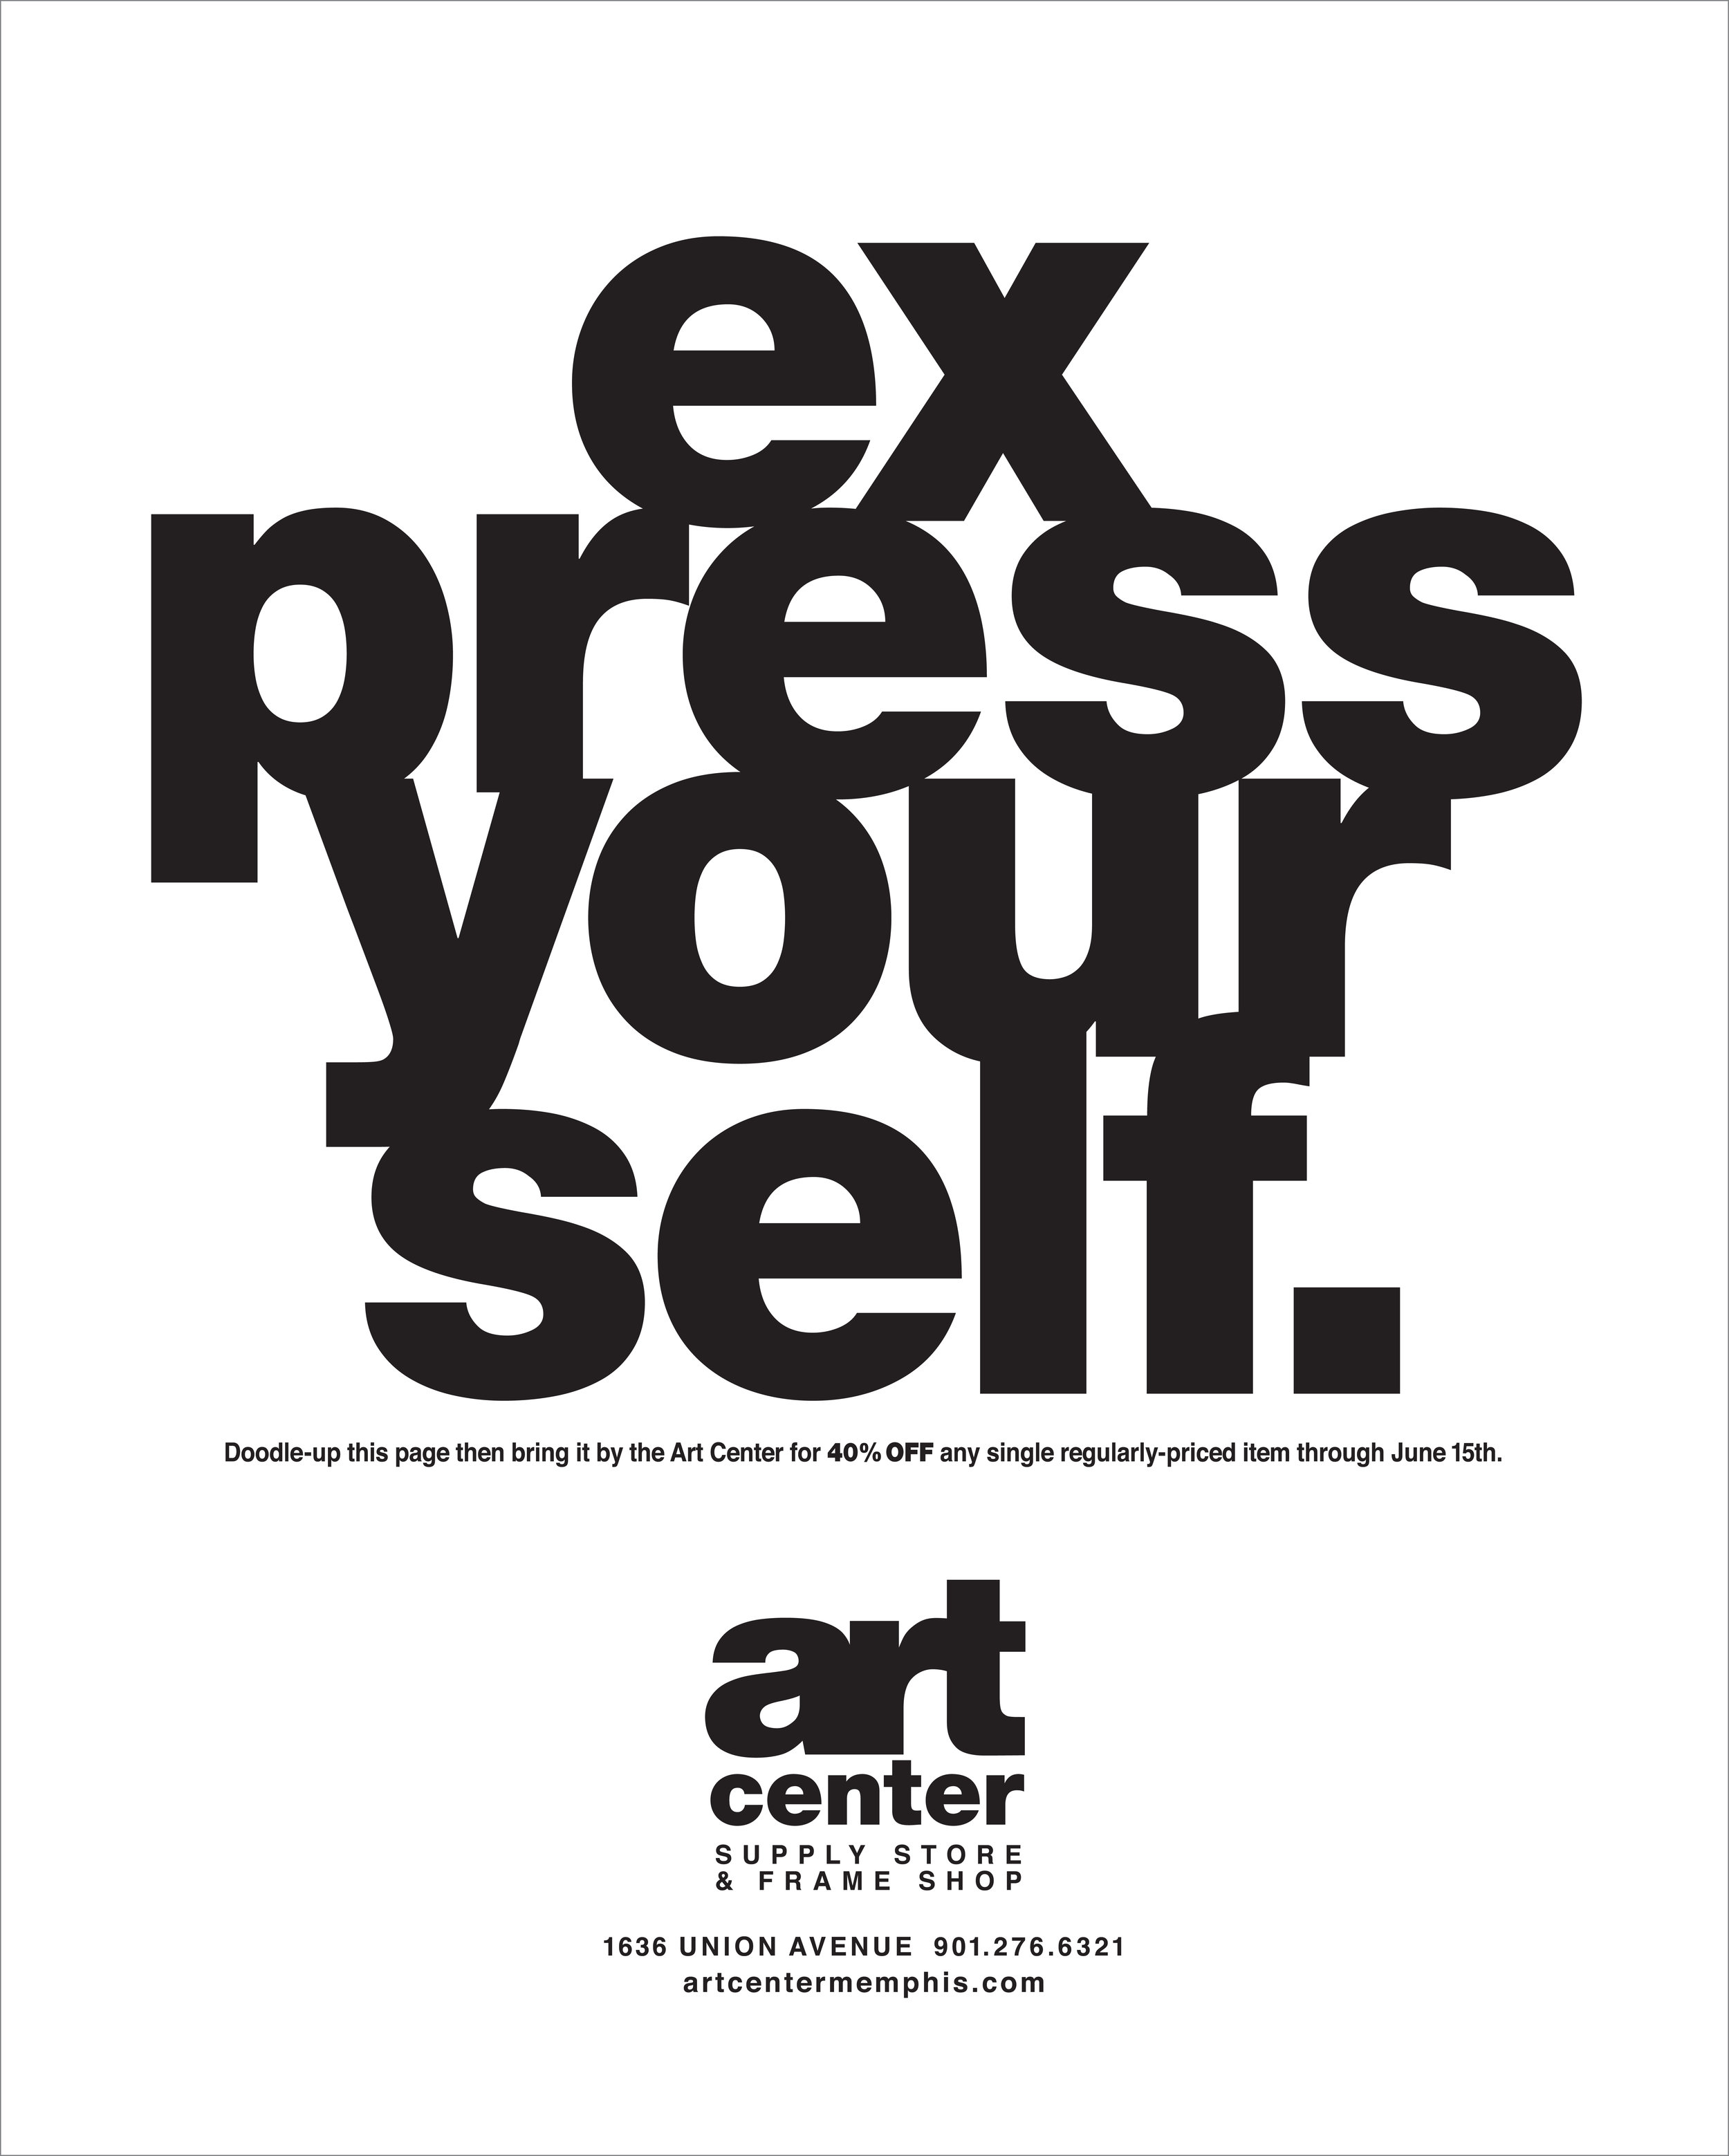  Art Center "express yourself" ad for Number  Creative, copywriting and design by Chuck Mitchell 